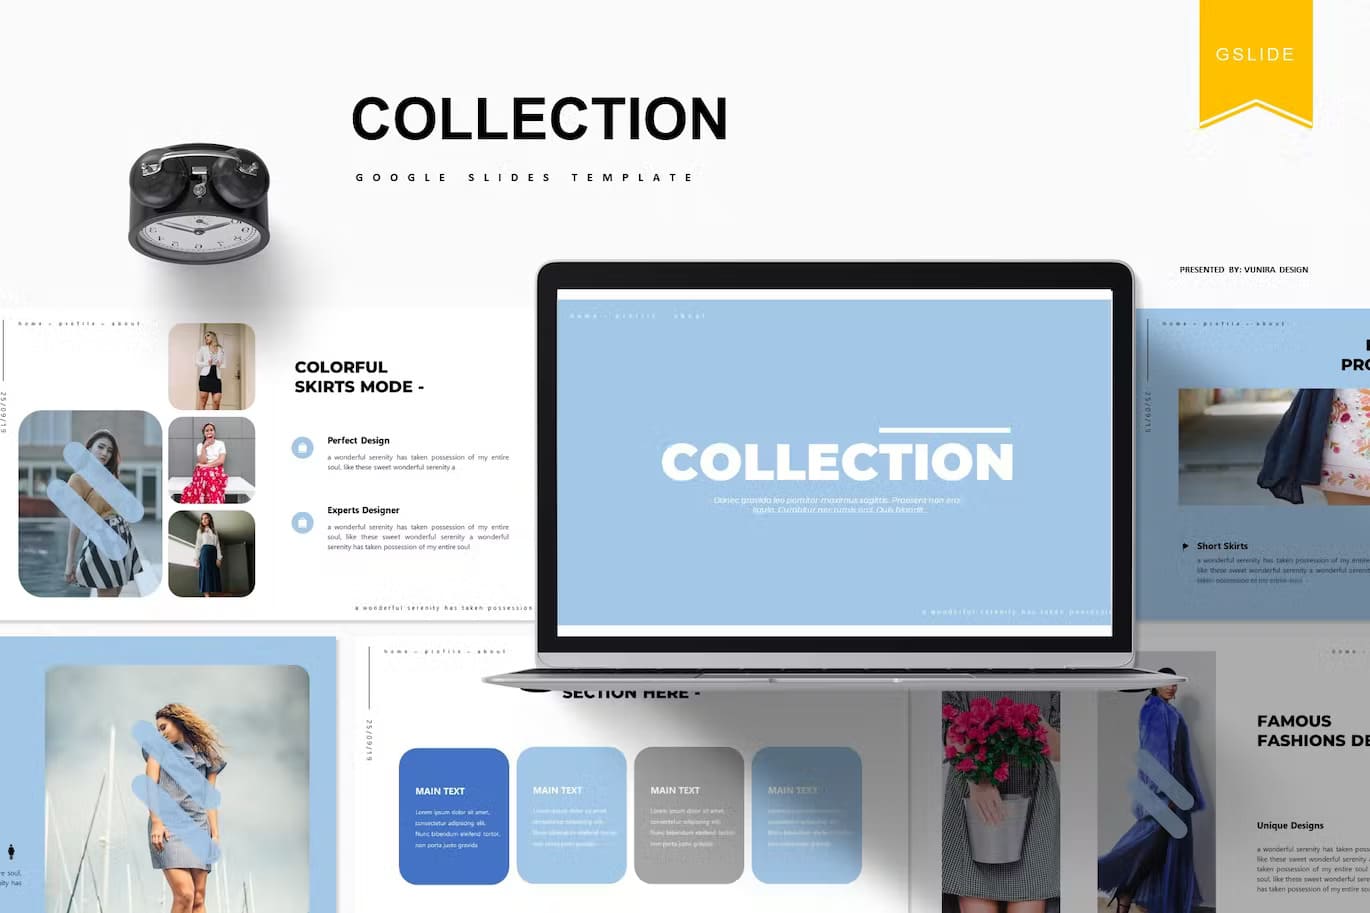 Collection Google slides template.